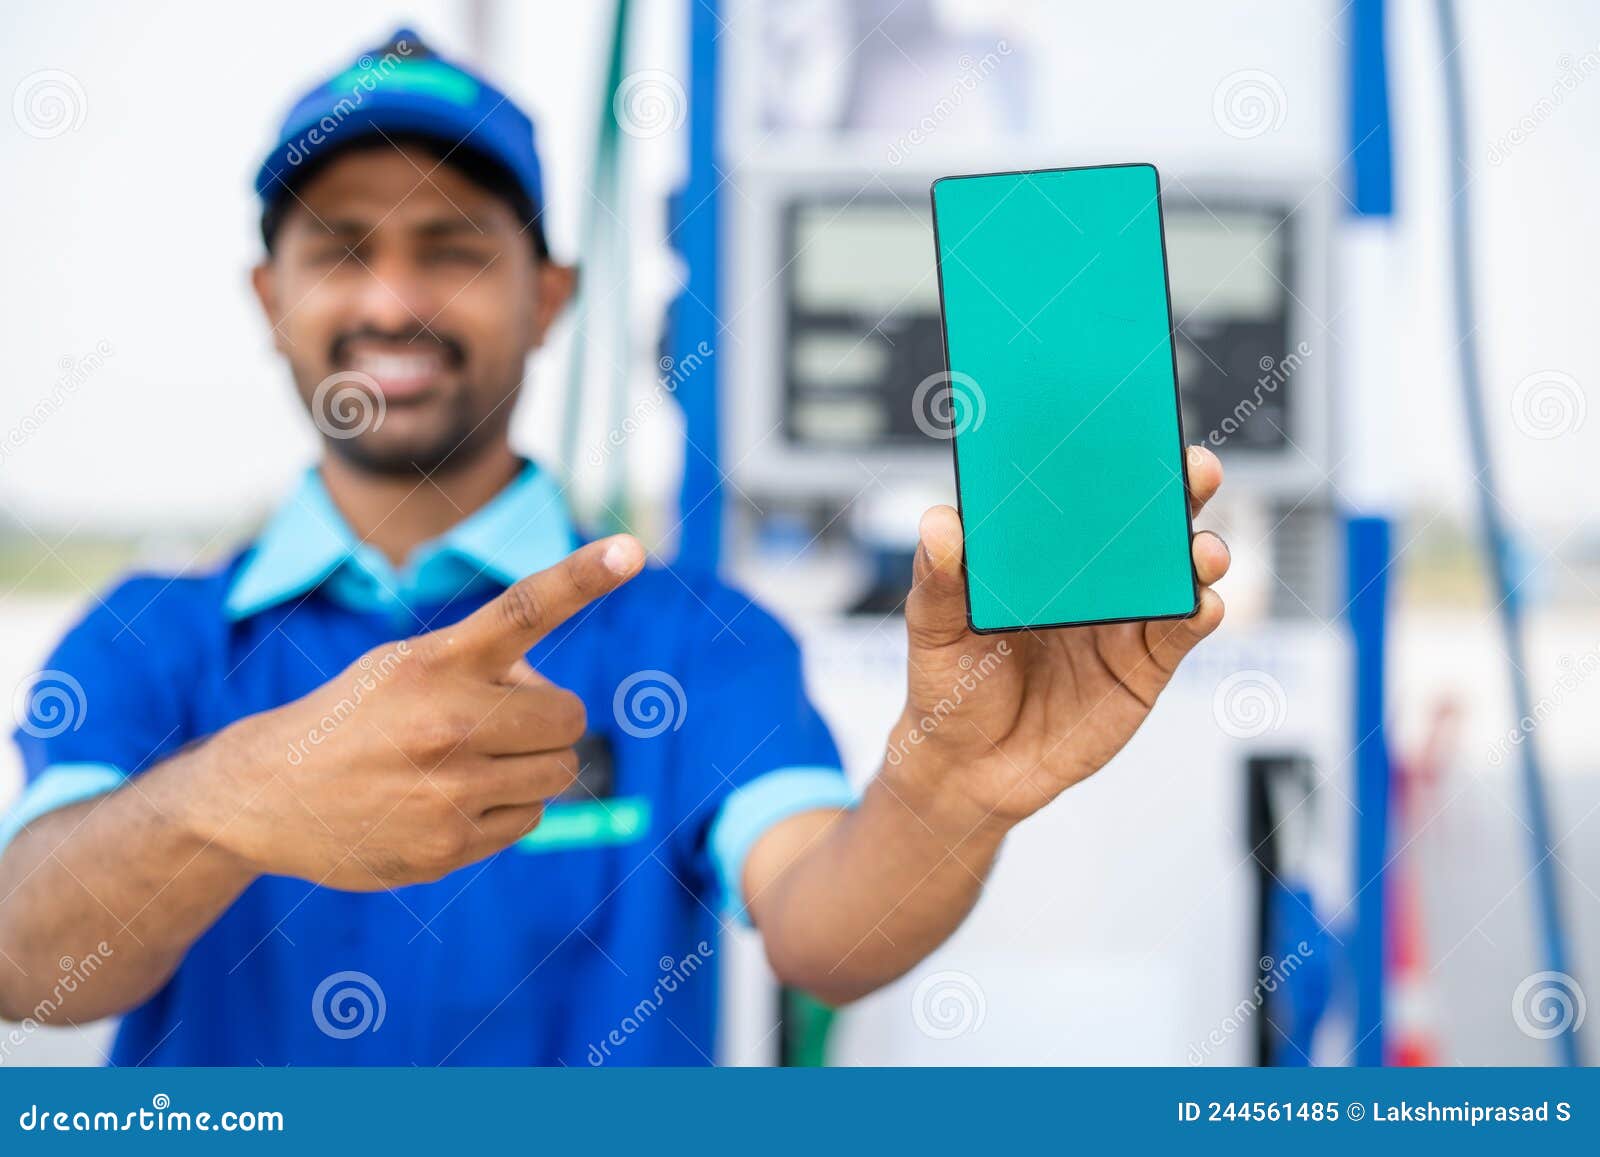 focus on phone, smiling petrol pump worker showing green screen mobile phone by pointing finger by looking at camera at